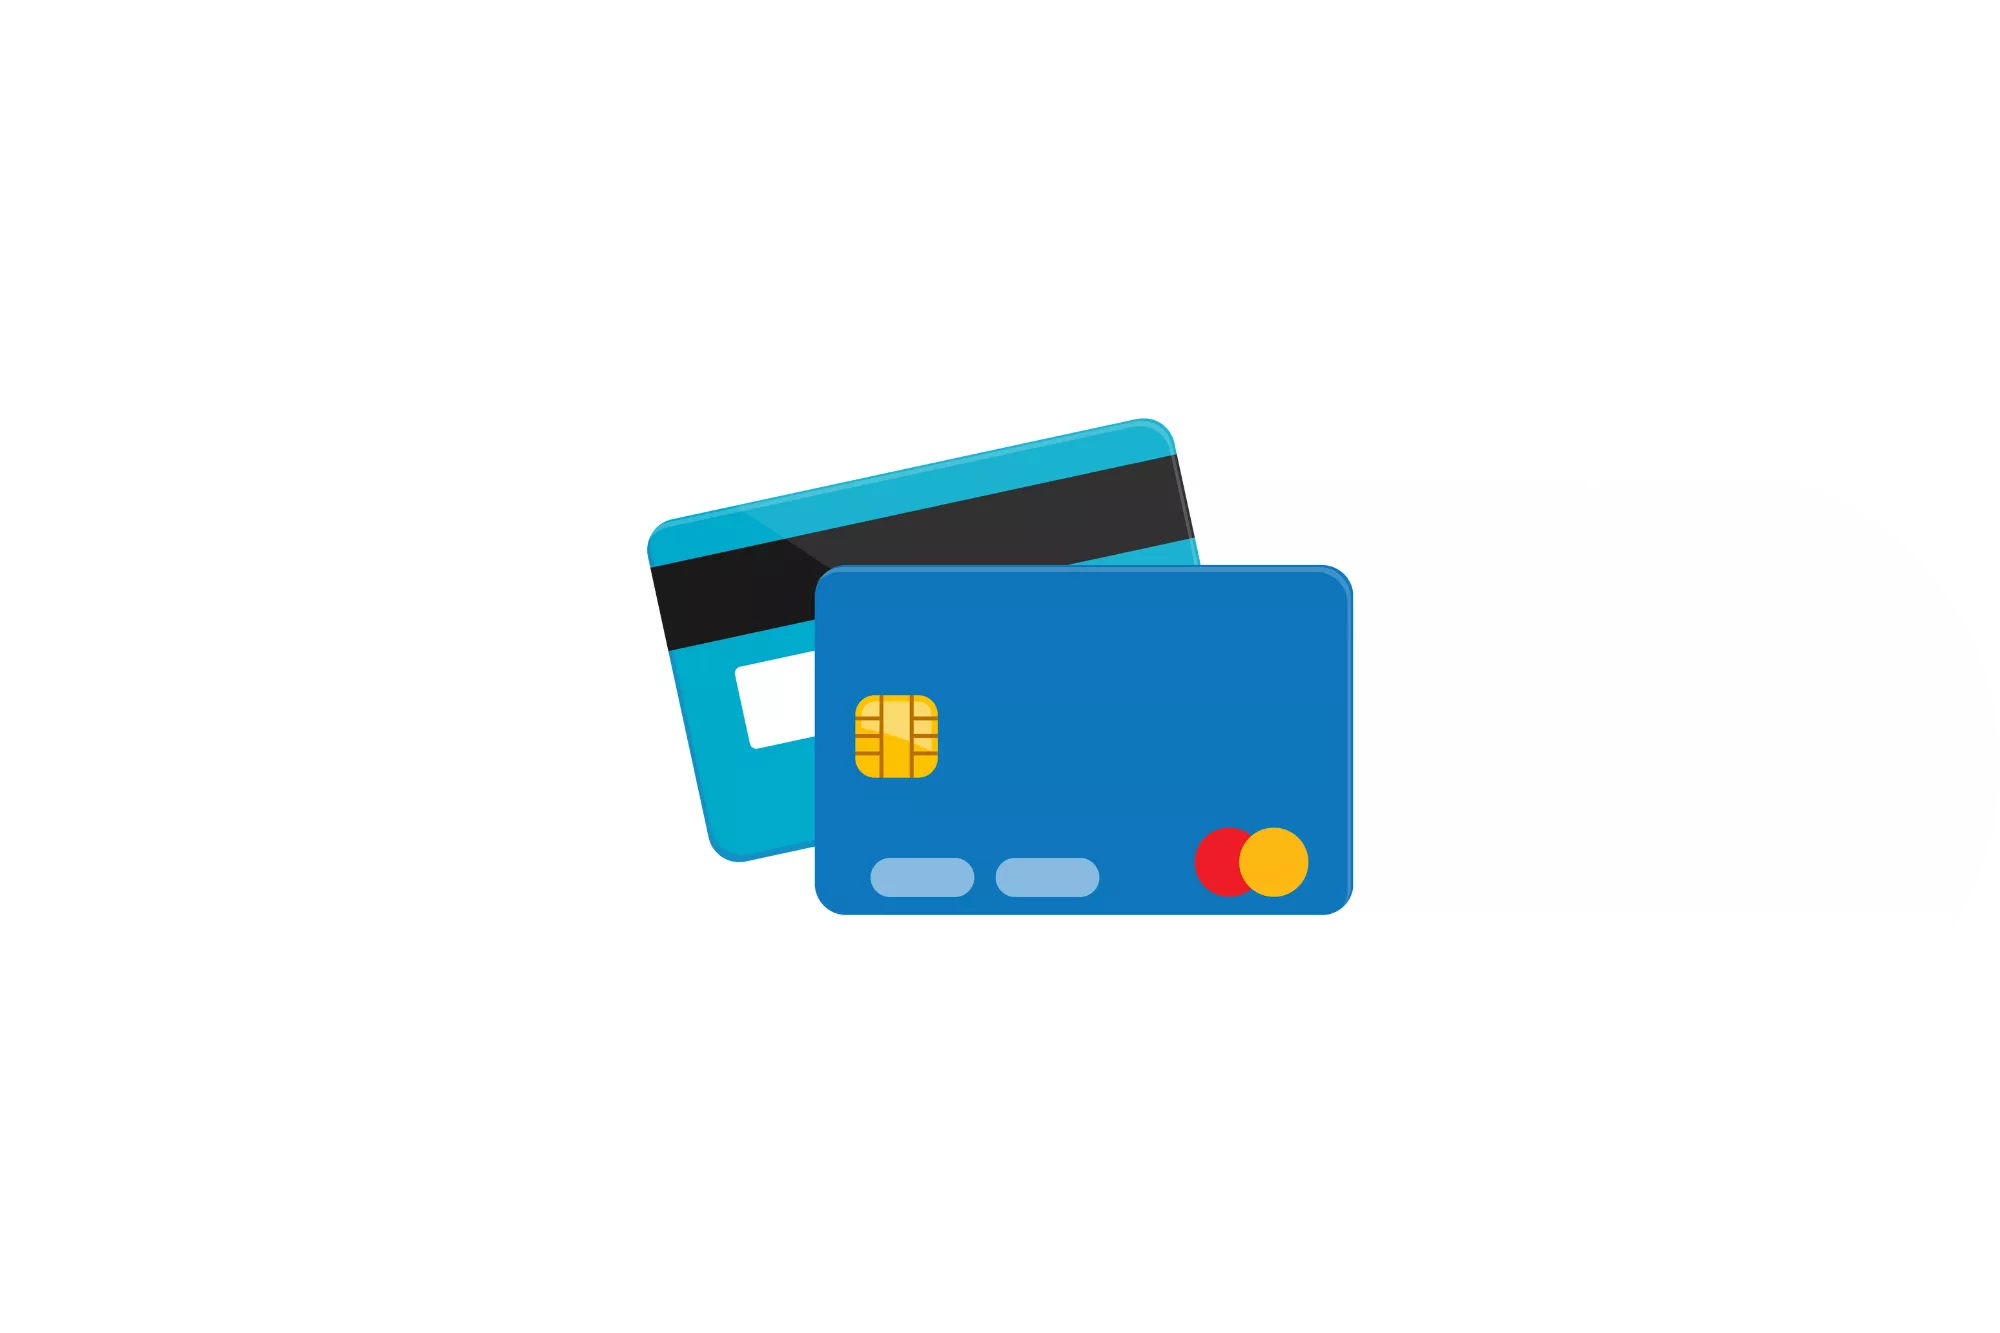 A cloud with credit cards in it to represent a payment gateway vs payment aggregator.